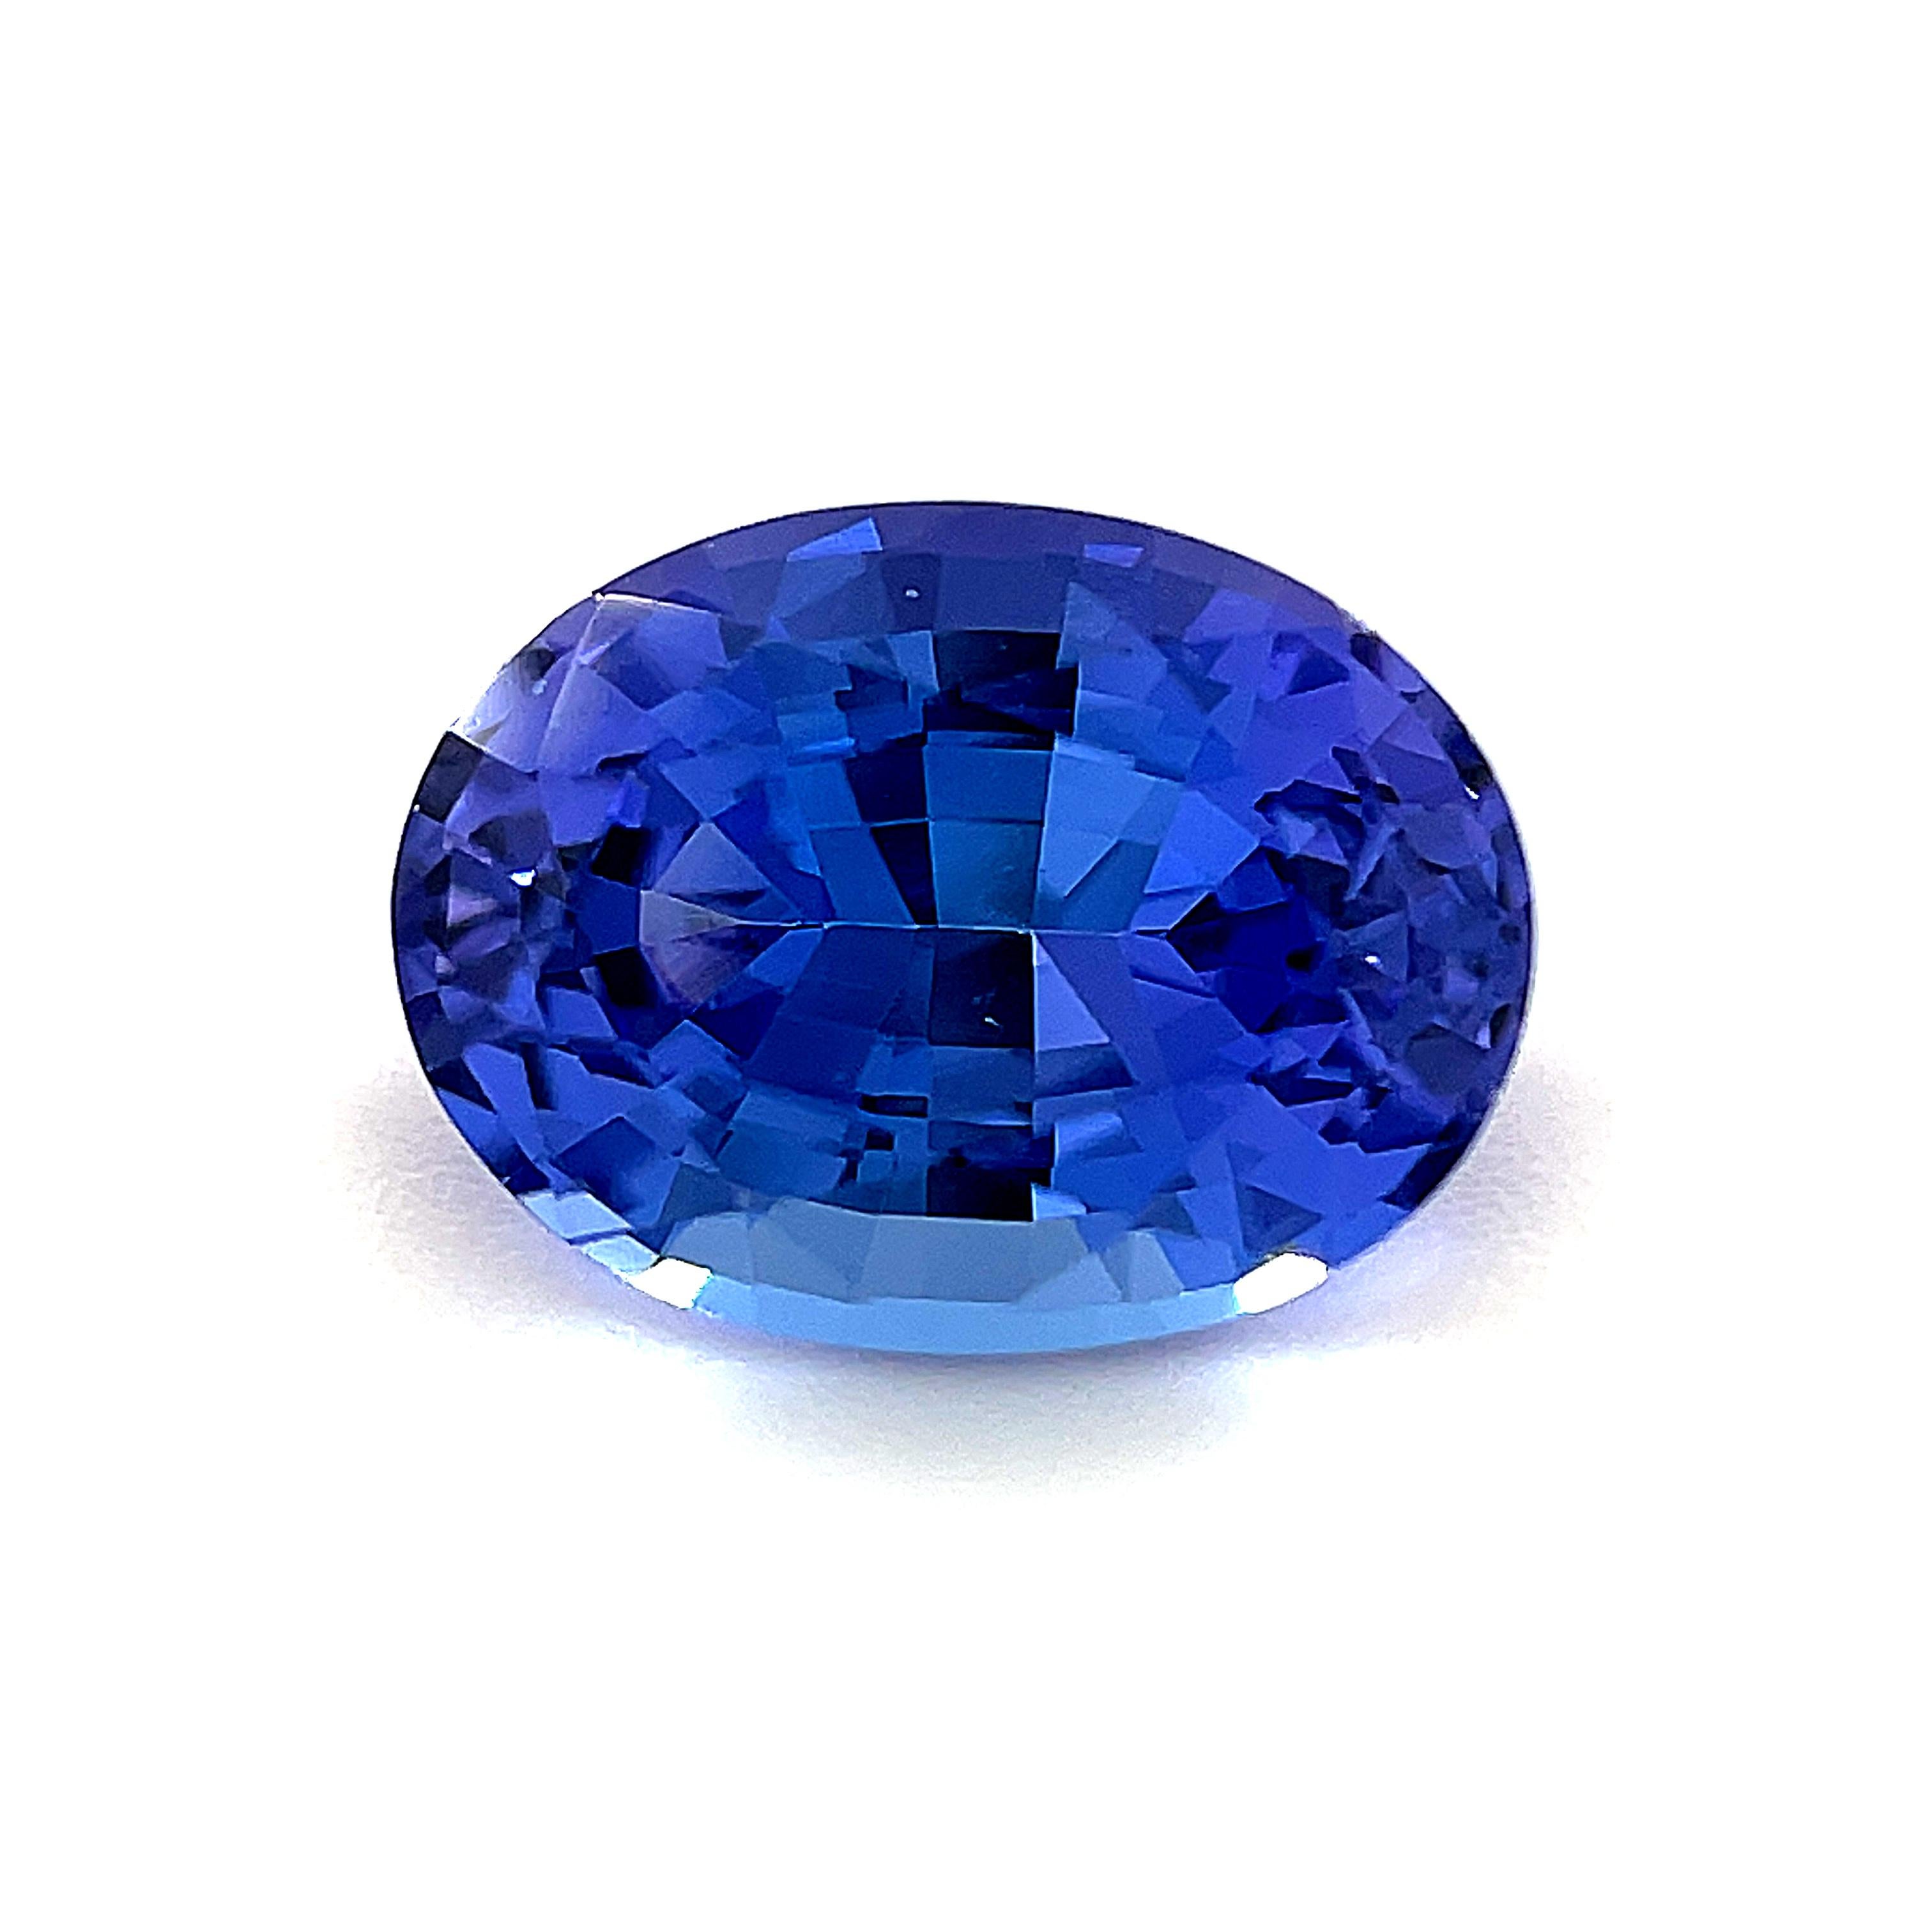 This 1.50 carat oval tanzanite has beautiful, medium violet-blue color and is such a pretty gem! It will make a gorgeous ring or pendant with its classic tanzanite color and near perfect proportions!  Measuring 8.02 x 5.97 millimeters, it has the